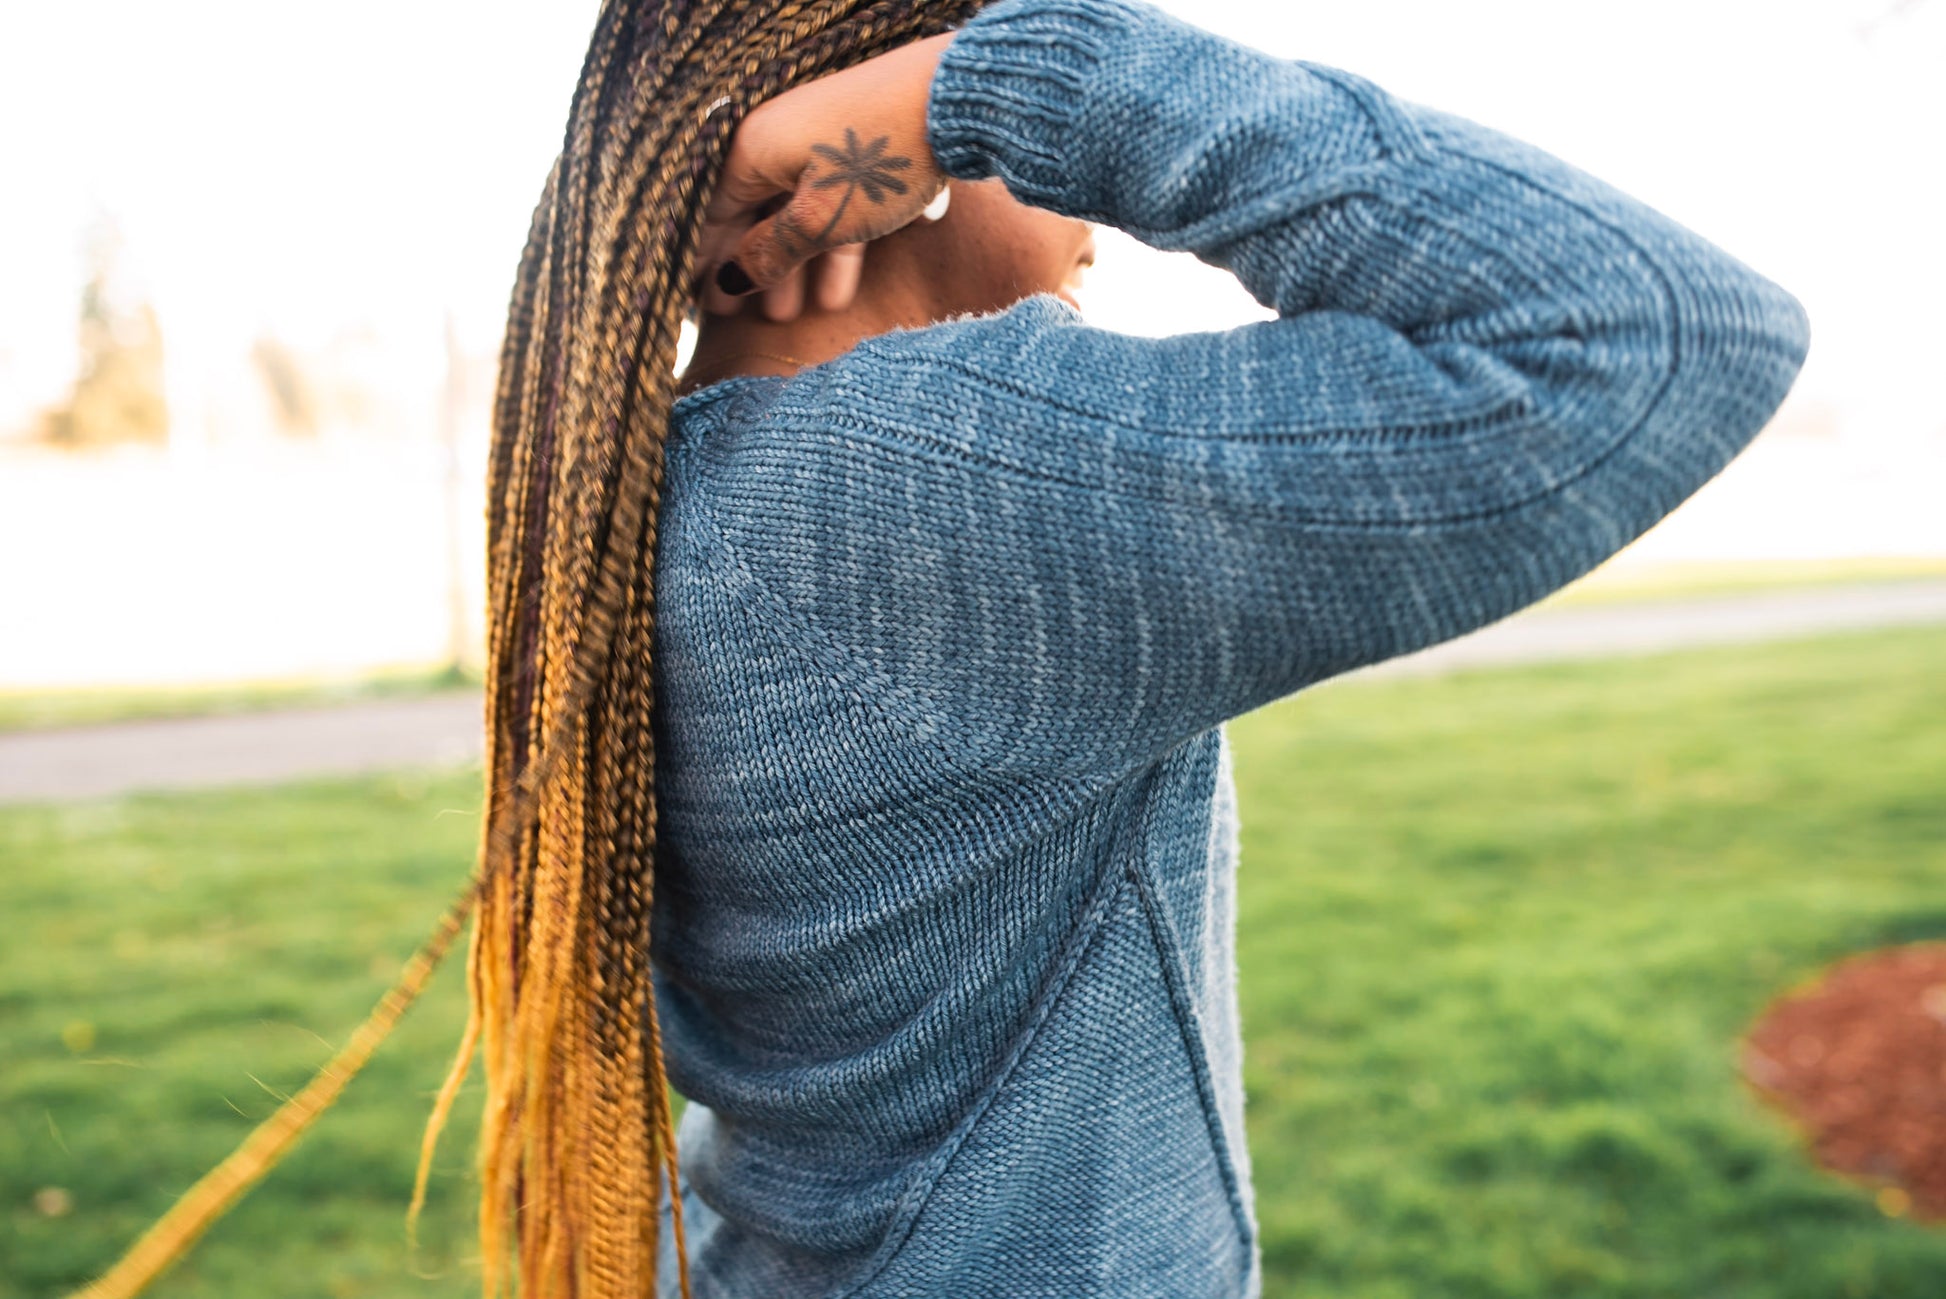 Seen from behind at a three quarter angle, Mia smiles while moving her braids off her shoulders. The camera focuses on the cable details of her hand knit blue sweater.